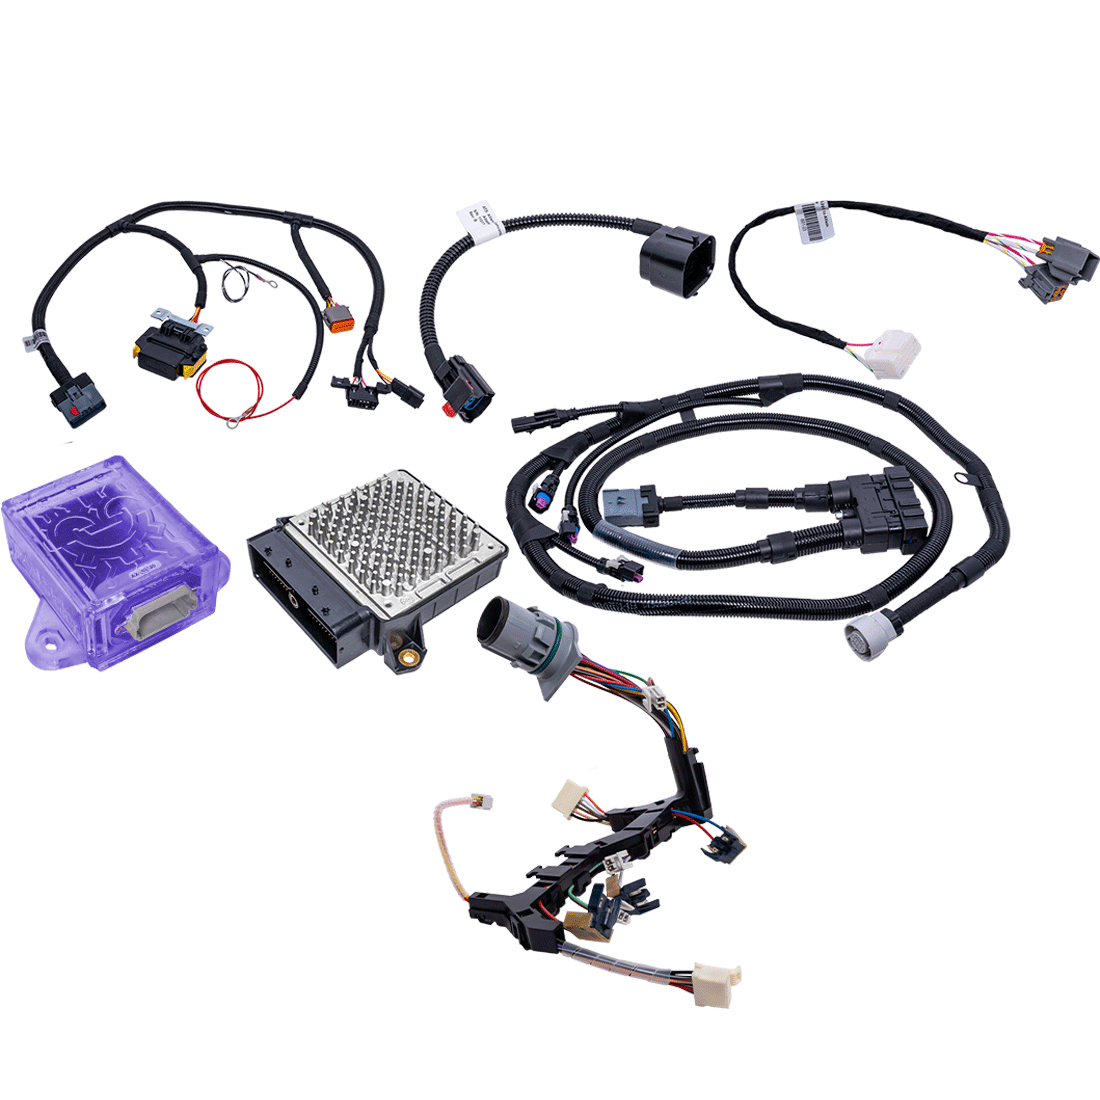 ATS 3190522392 Electronics Upgrade Kit Allison Conversion 68RFE 2013-2014 2006-2010 6 Speed Allison Used in Conversion